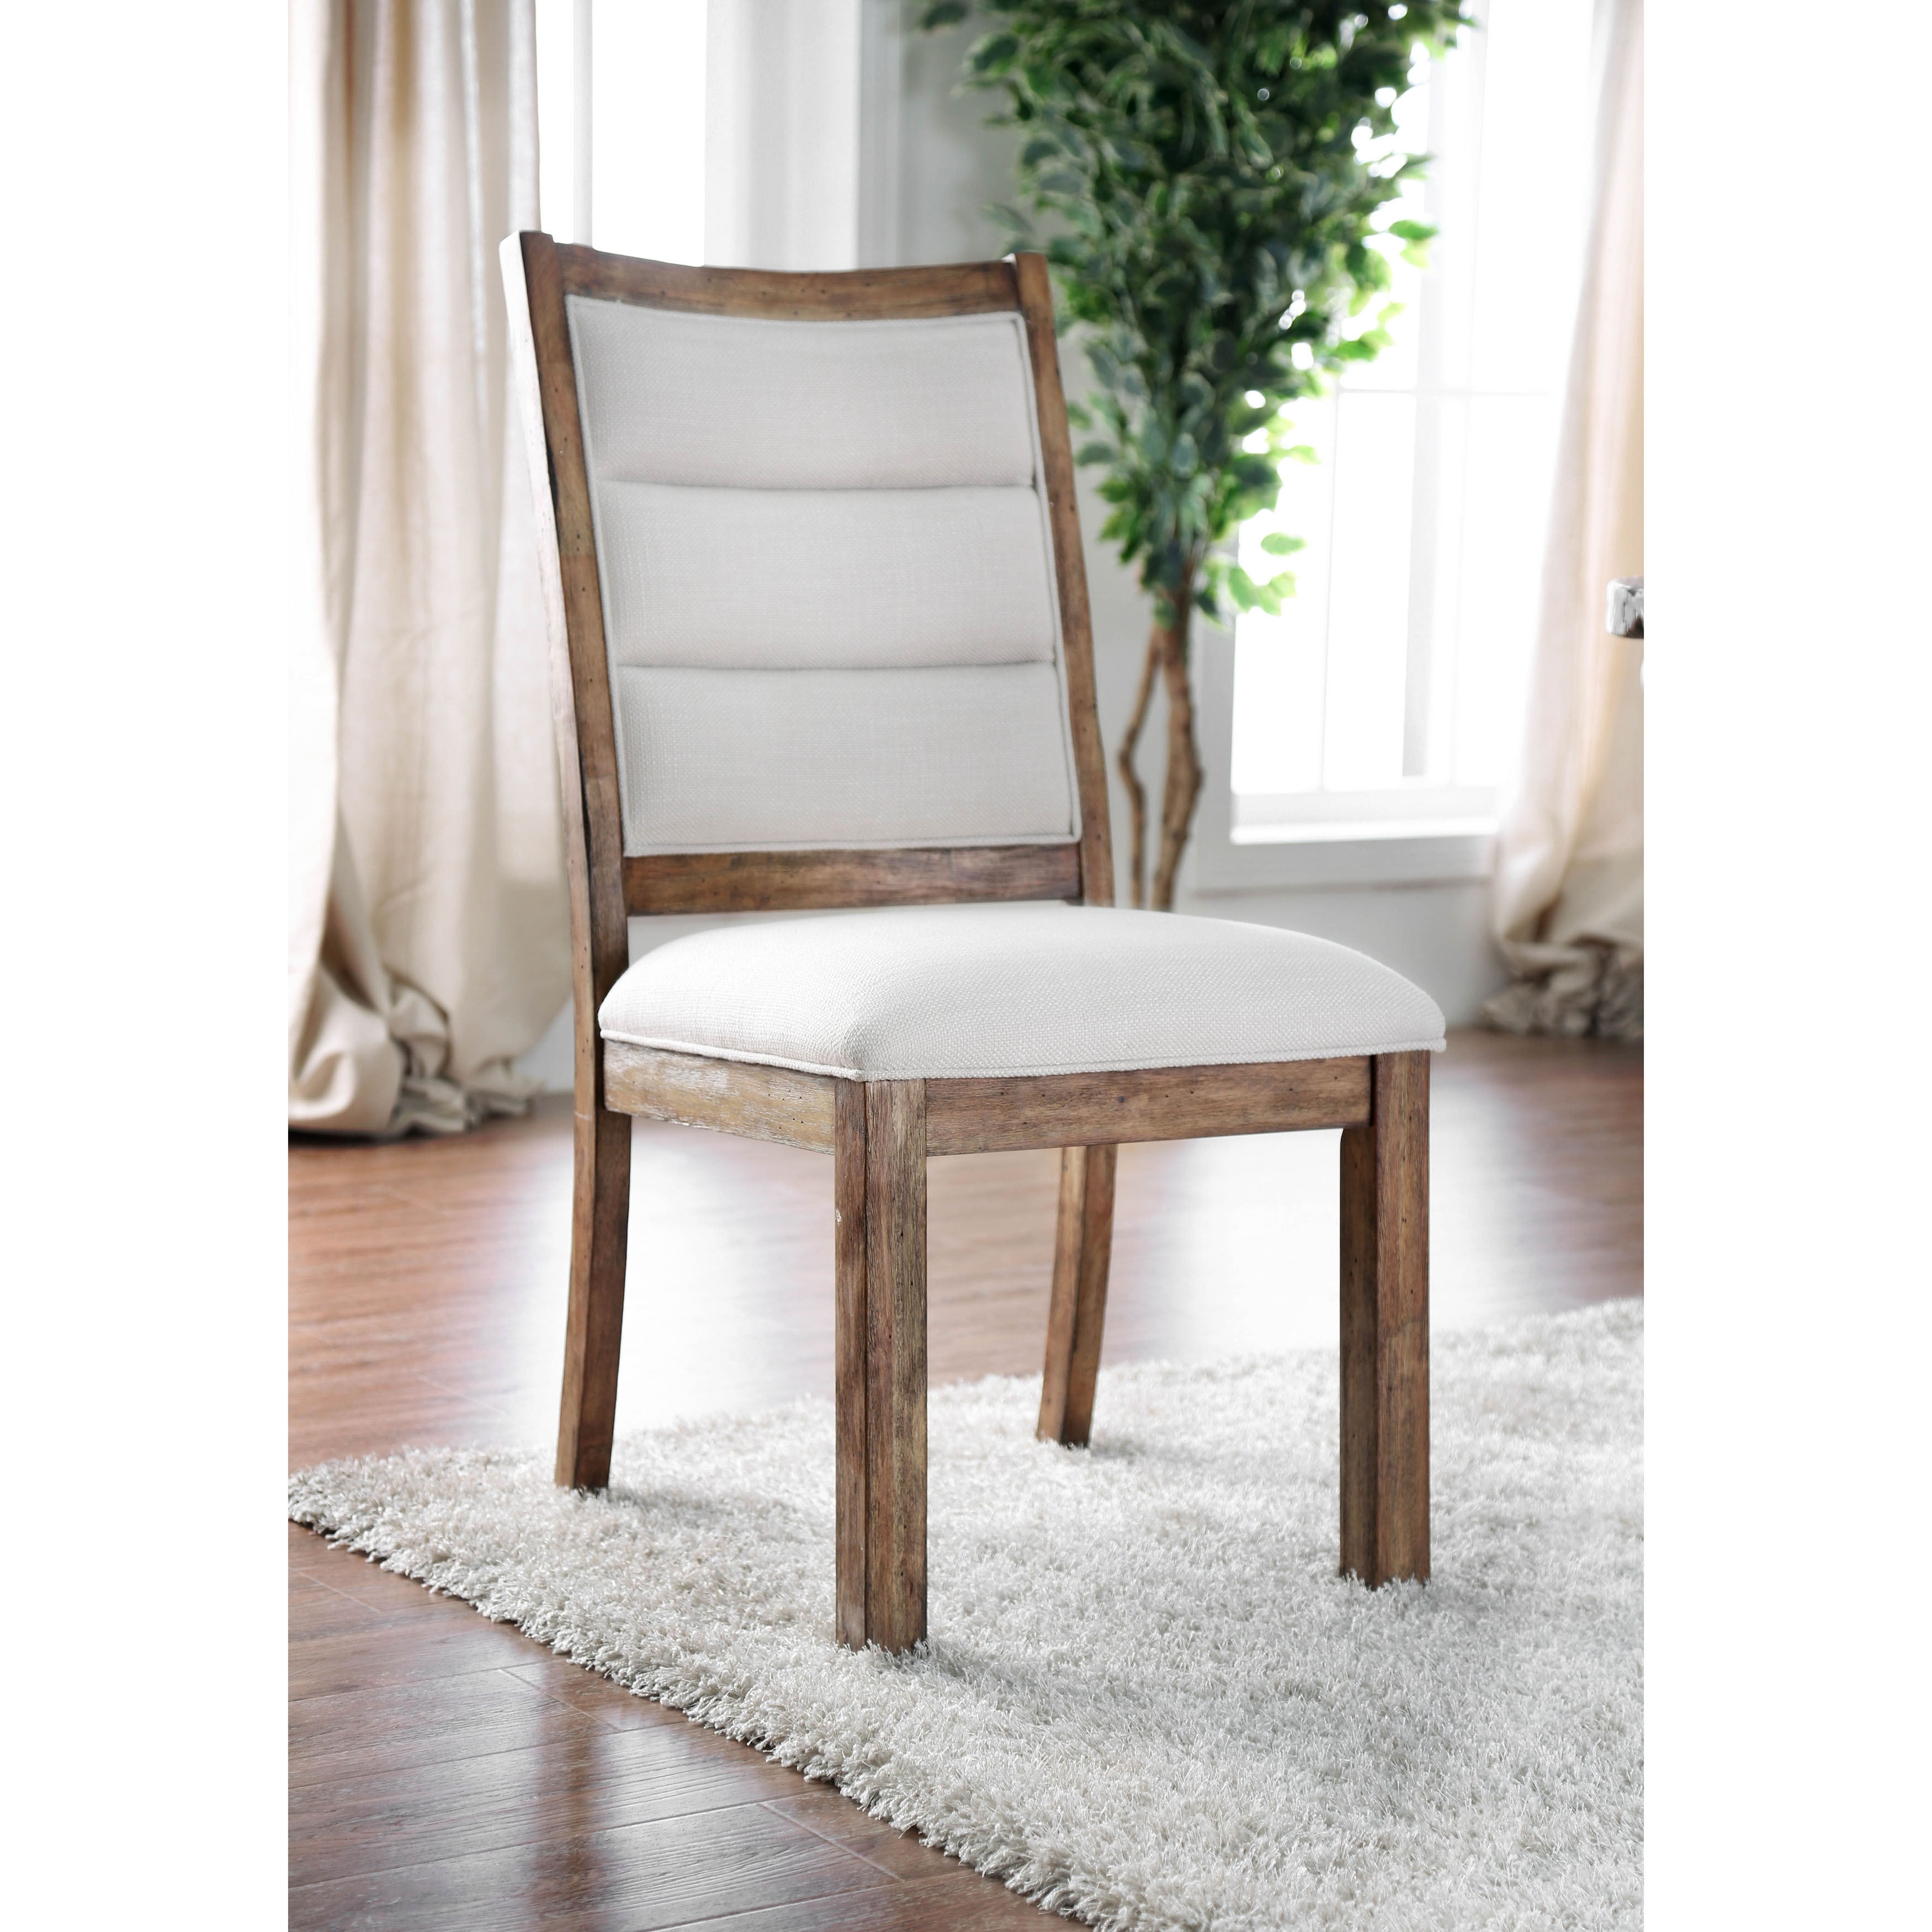 carbon loft bern rustic wooden dining chairs set of 2